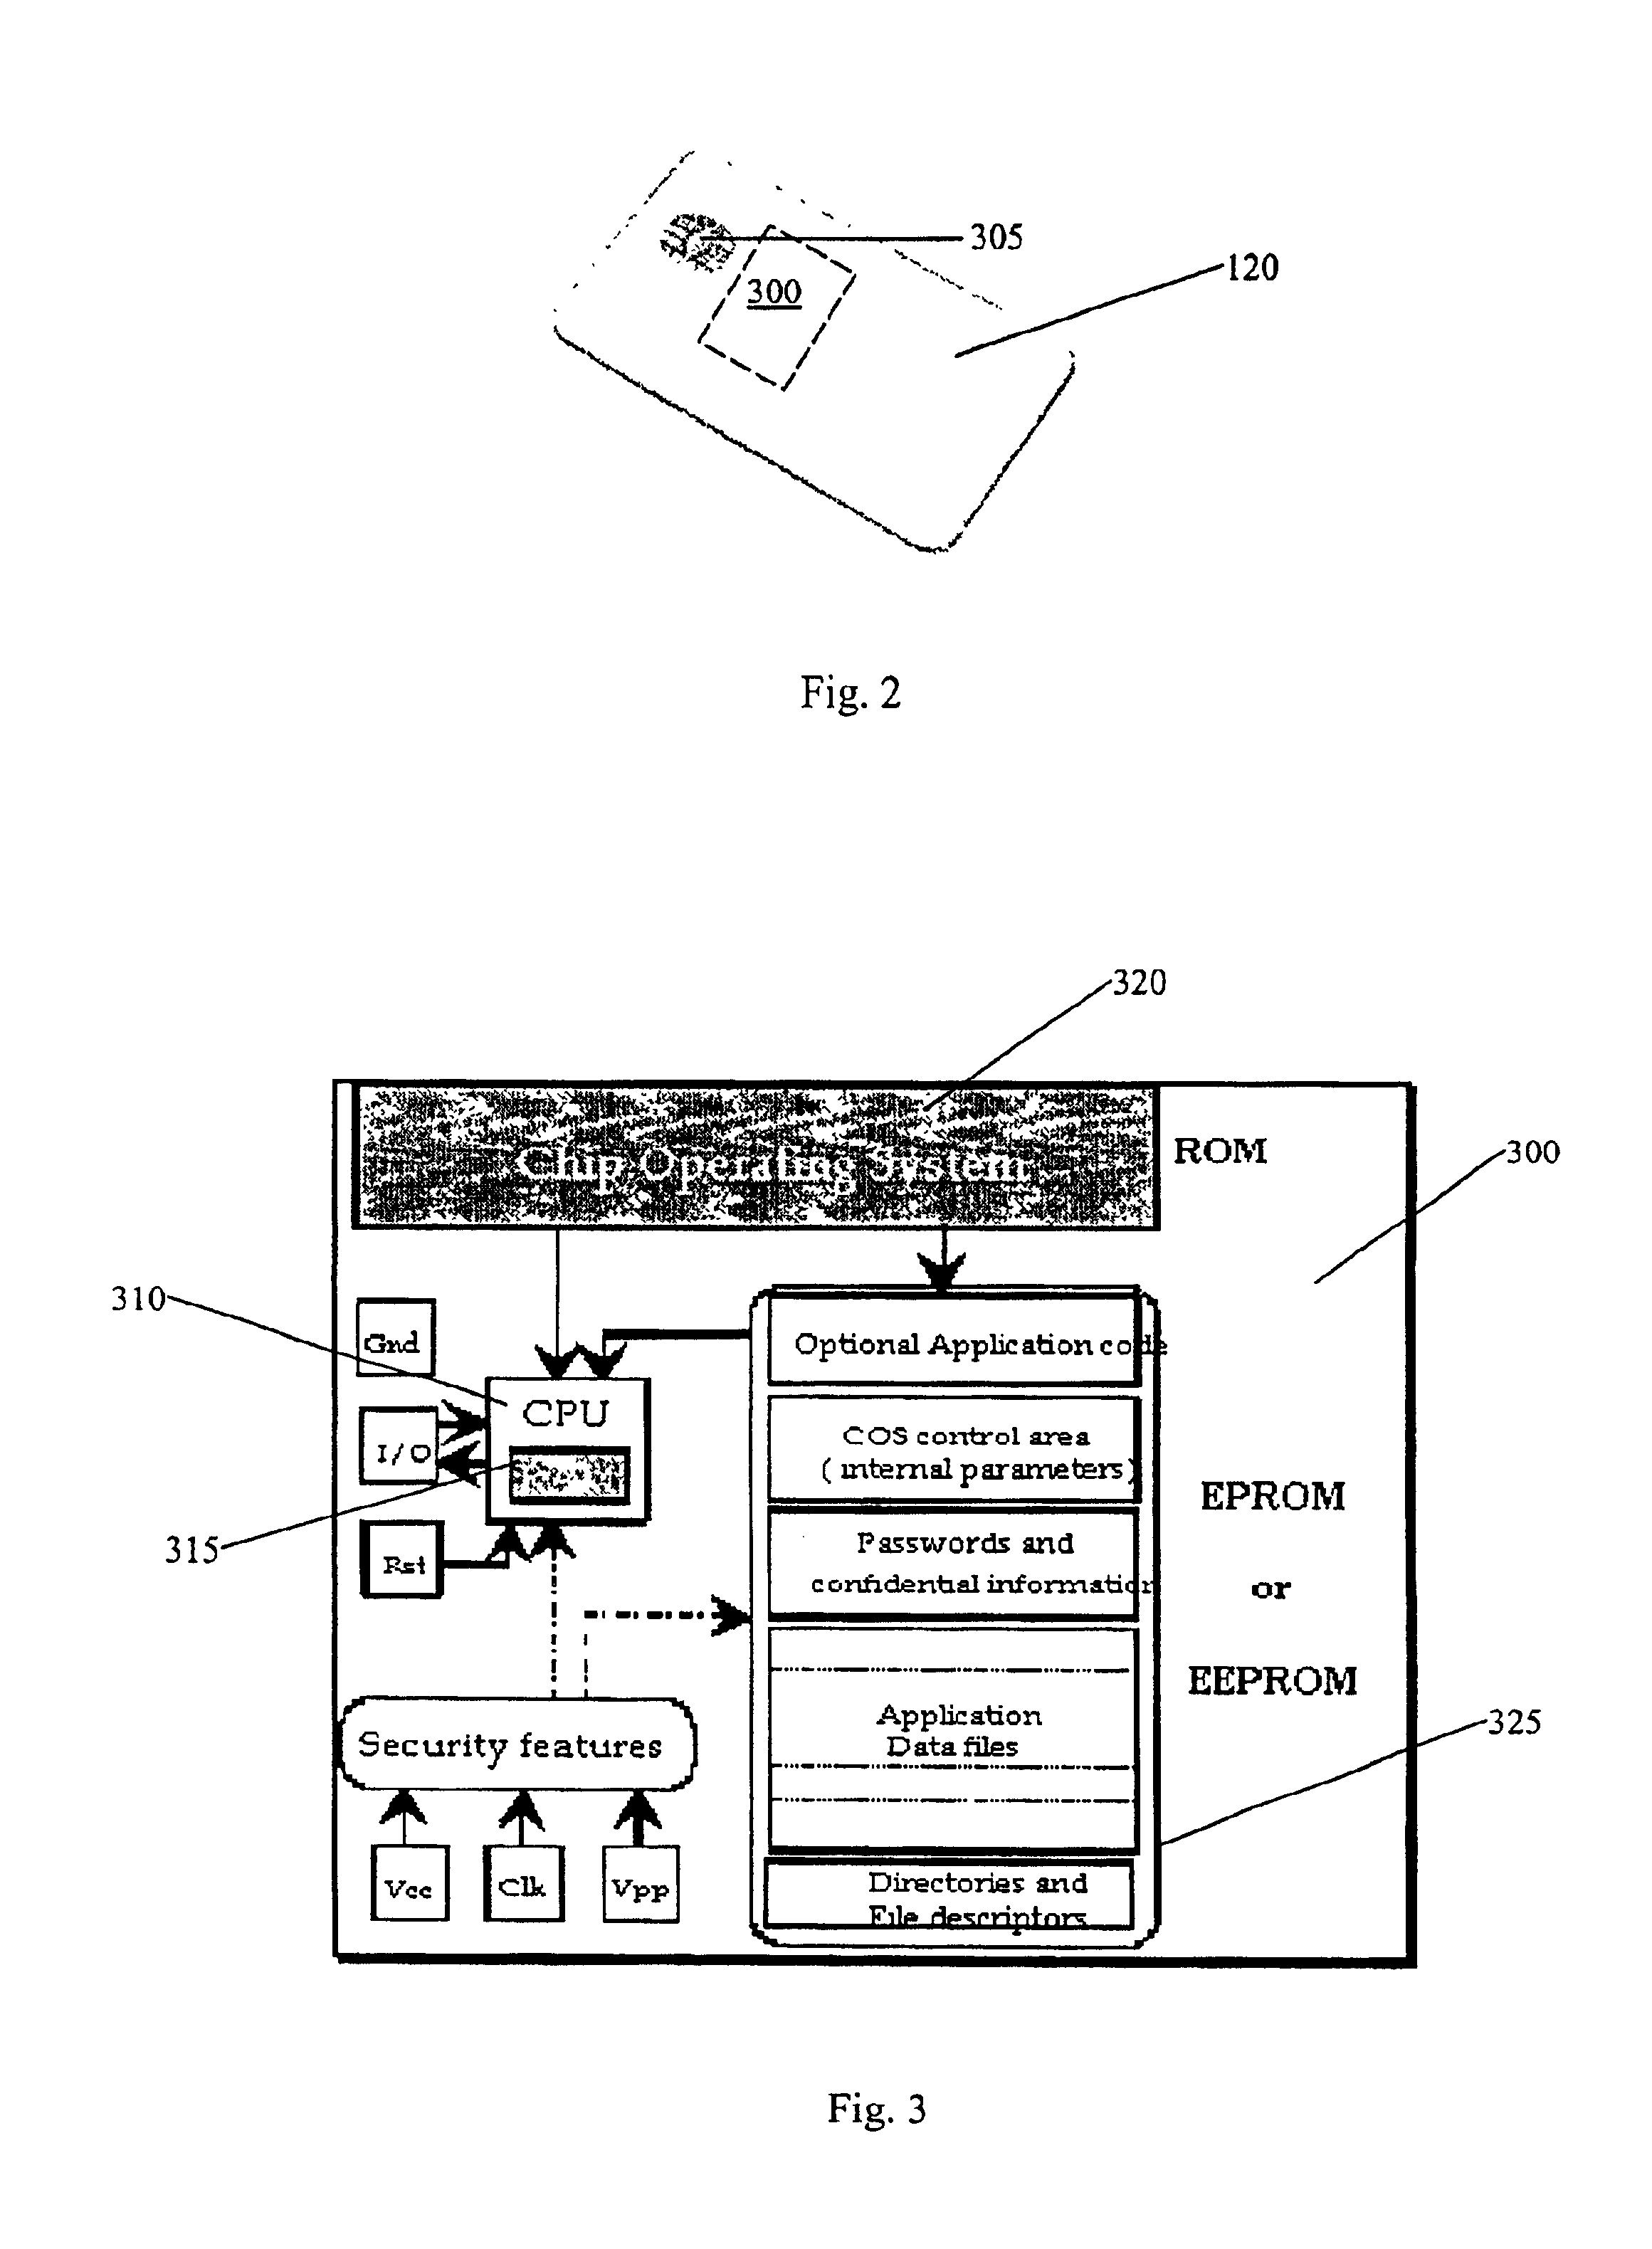 System and method for preventing unauthorized access to electronic data